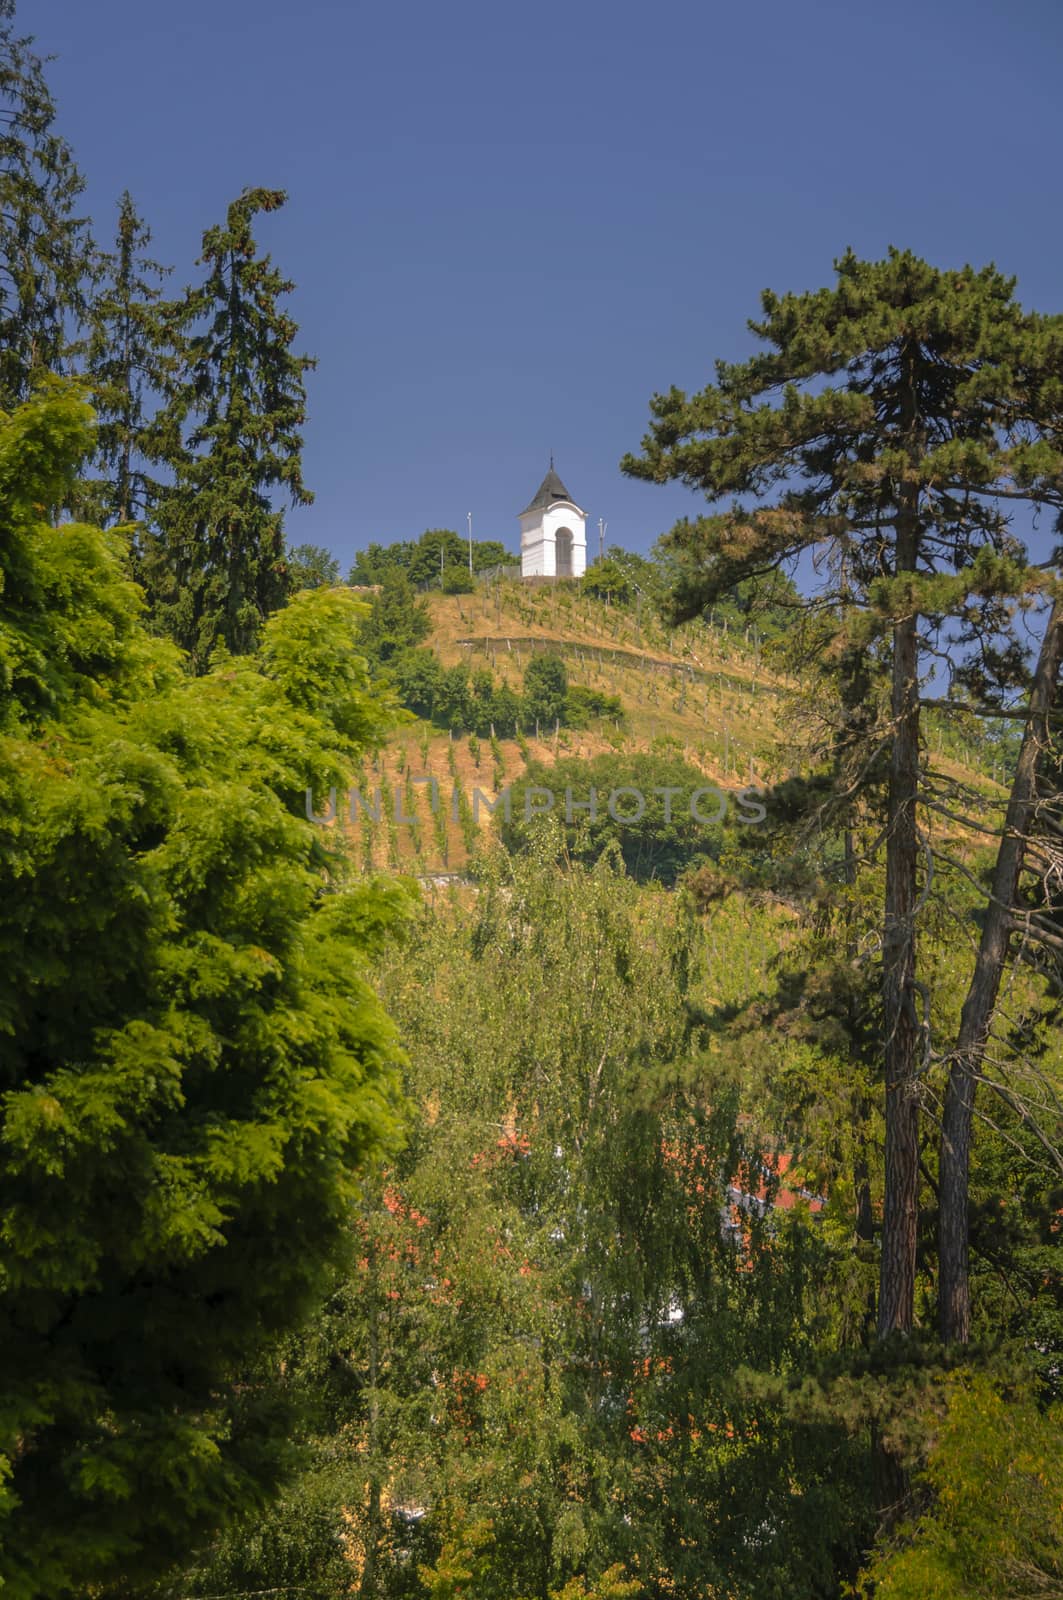 View on Piramida hill through trees in city park, Maribor Slovenia and the famous vineyard on the hill.